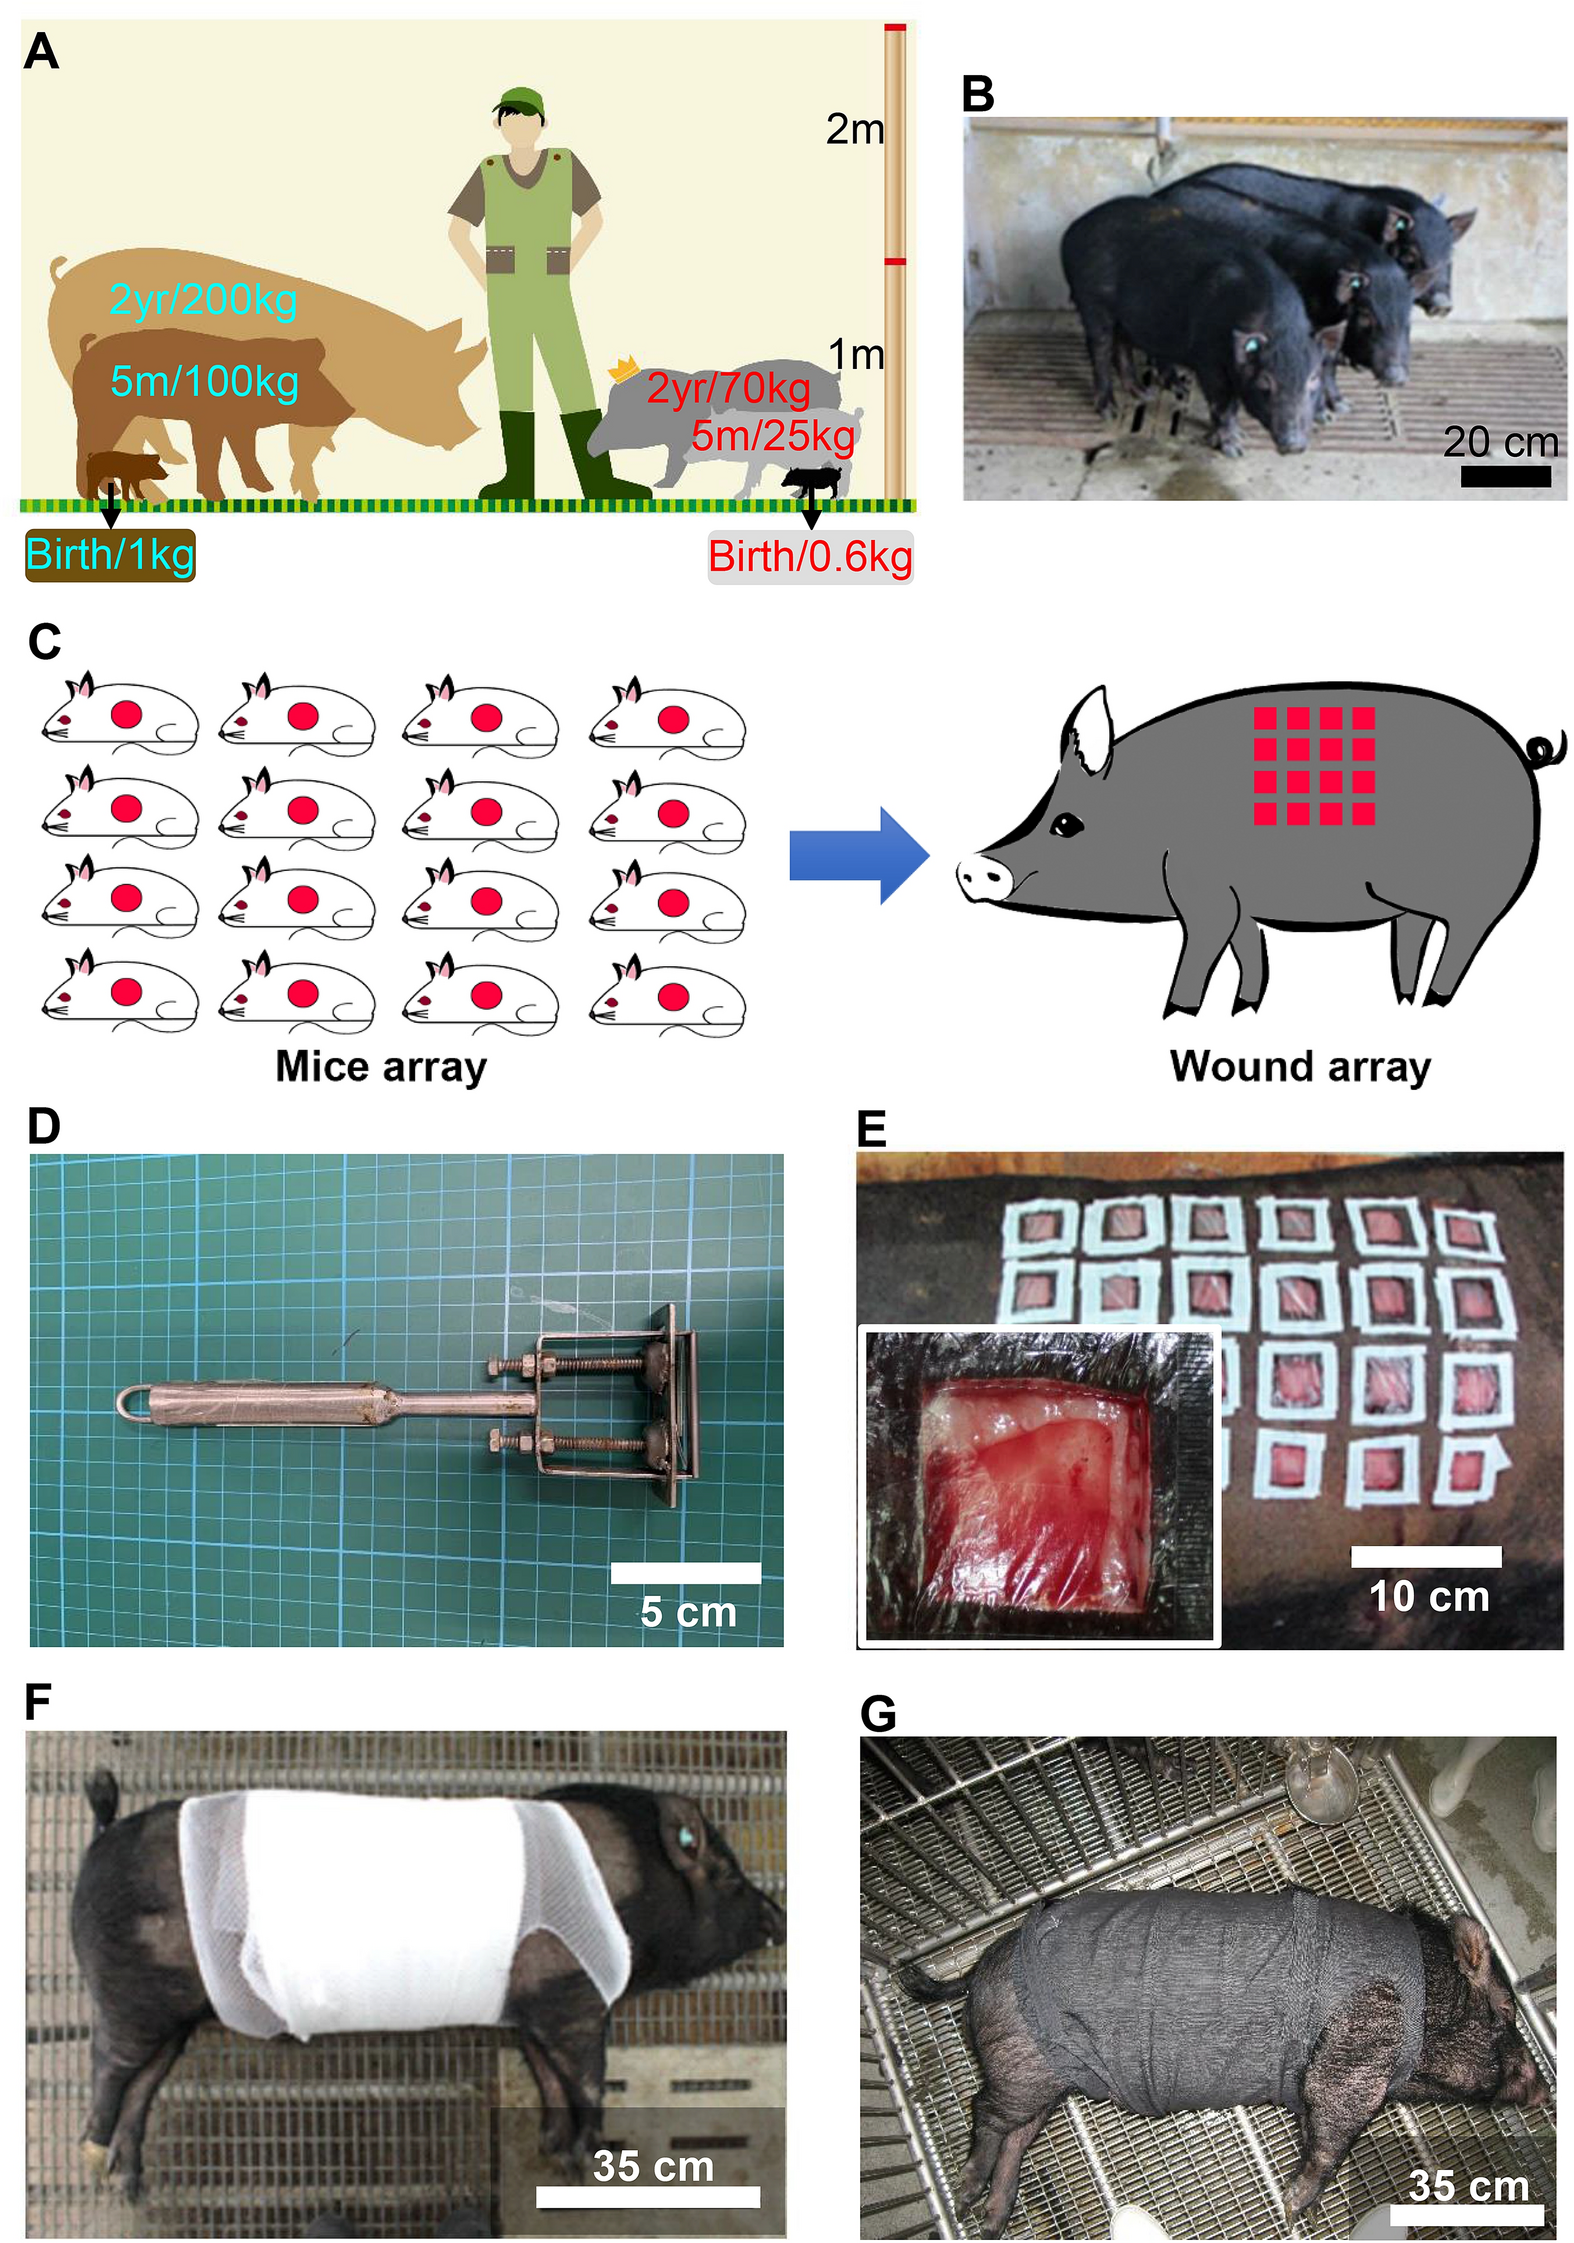 Skin wound healing assessment via an optimized wound array model in  miniature pigs | Scientific Reports